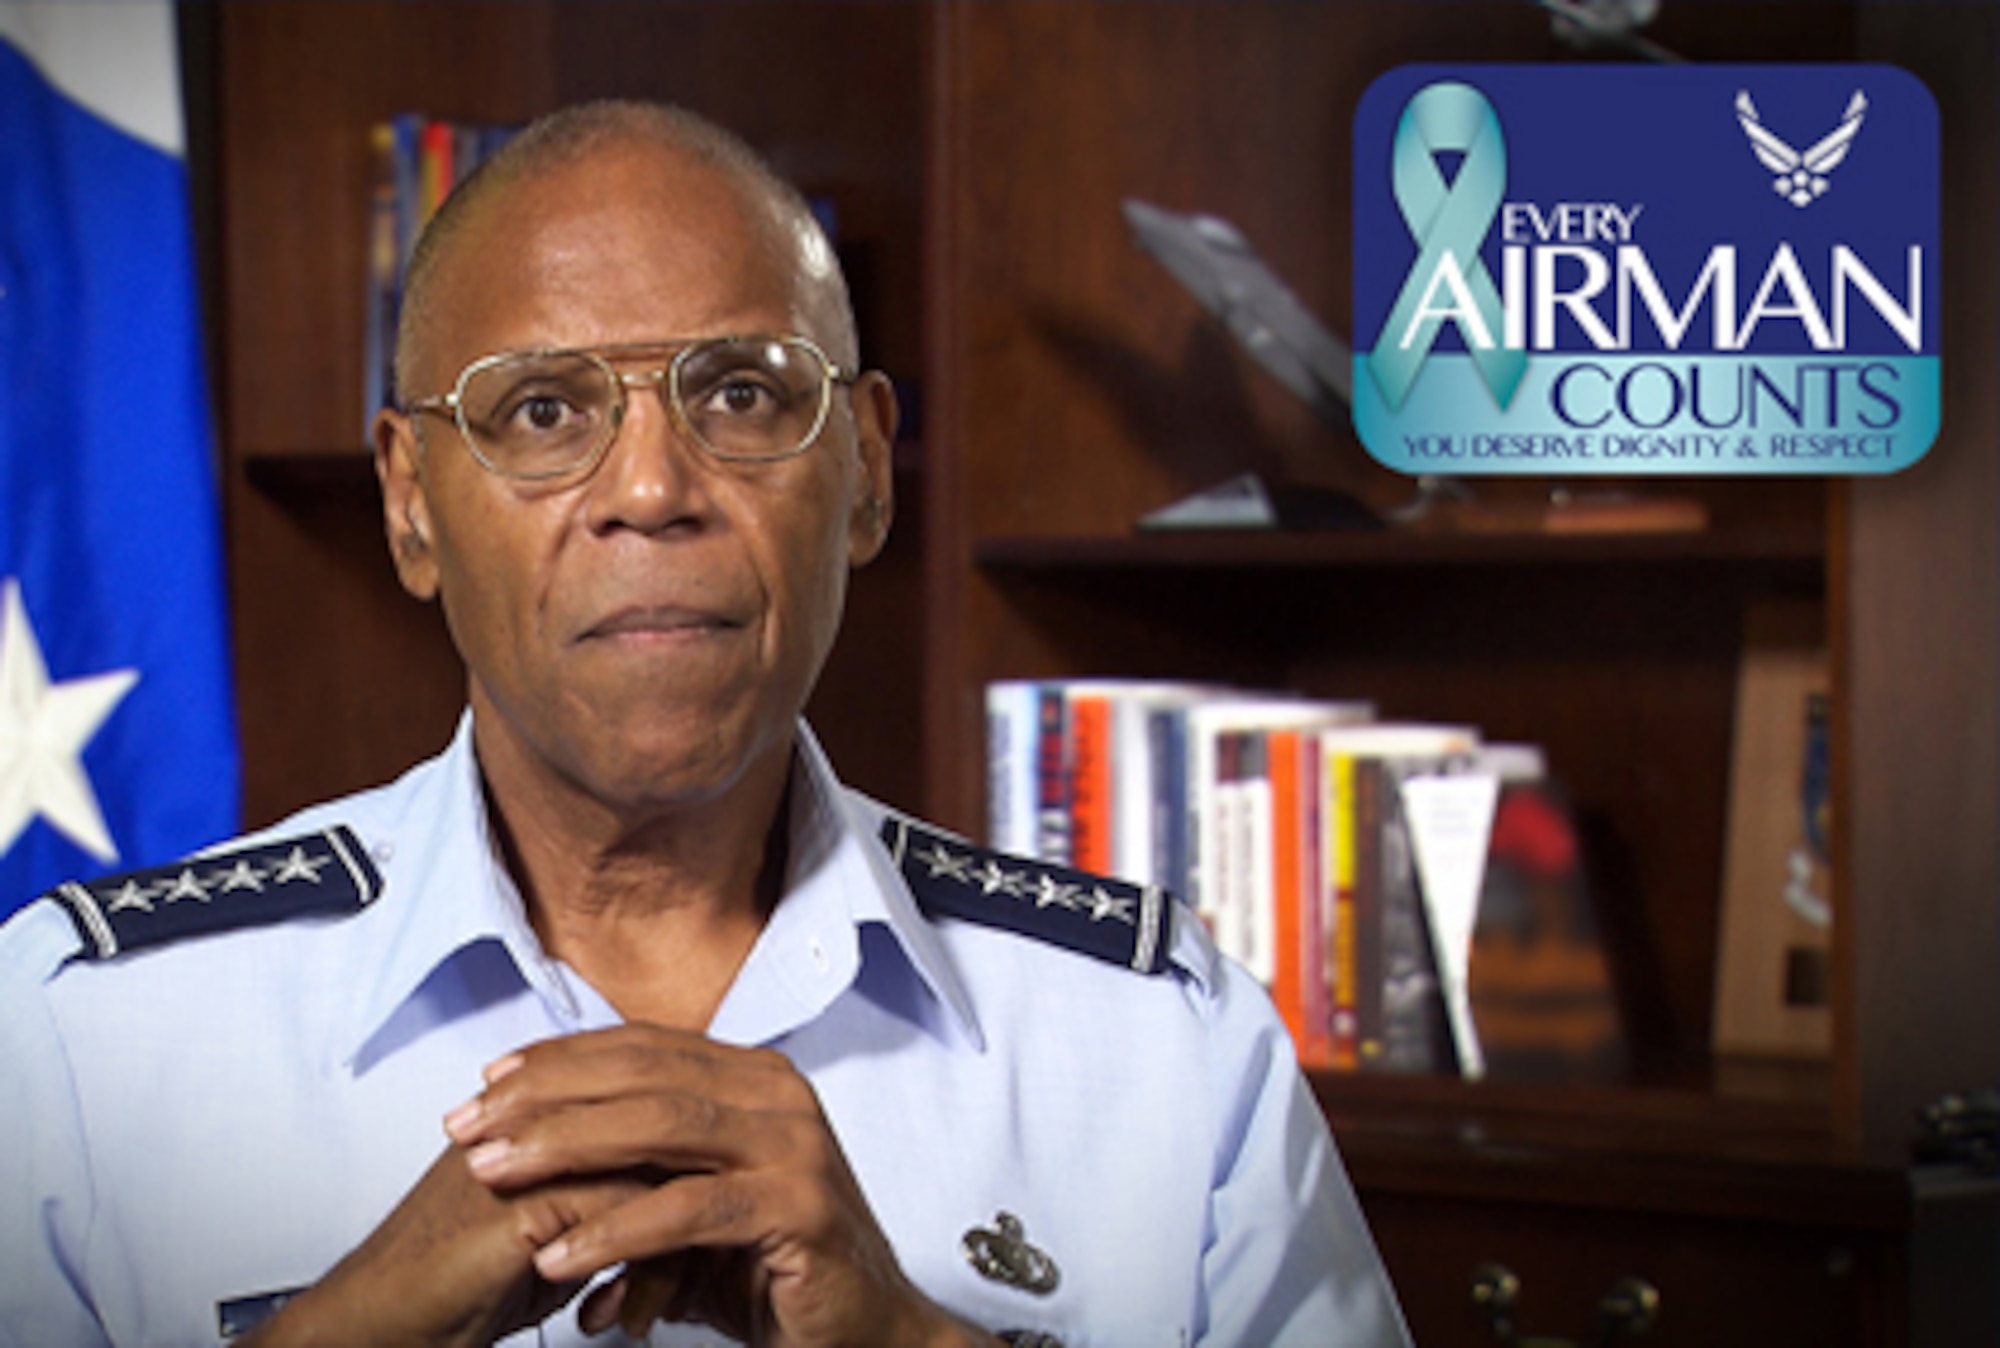 Gen. Larry Spencer, the Air Force vice chief of staff, encourages Airmen to get involved with "Every Airman Counts". The initative is designed to foster communication between Airmen and senior leaders about sexual assault prevention and response. (U.S. Air Force graphic)